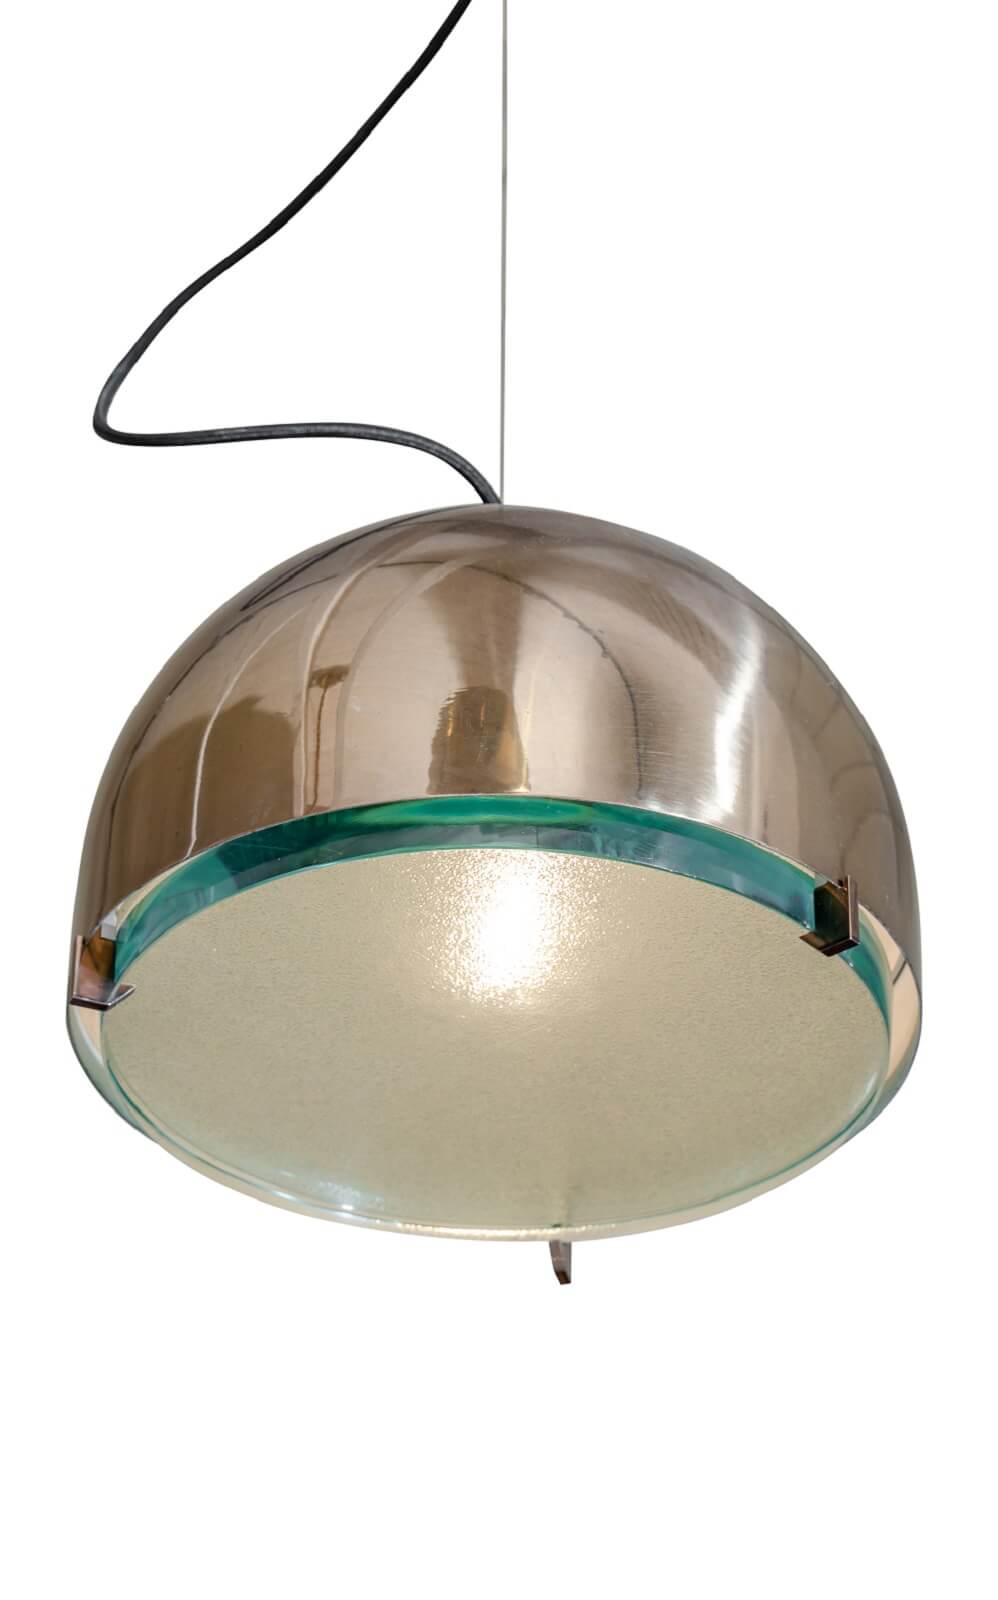 Ceiling lamp mod. 2409 by Max Ingrand for sale